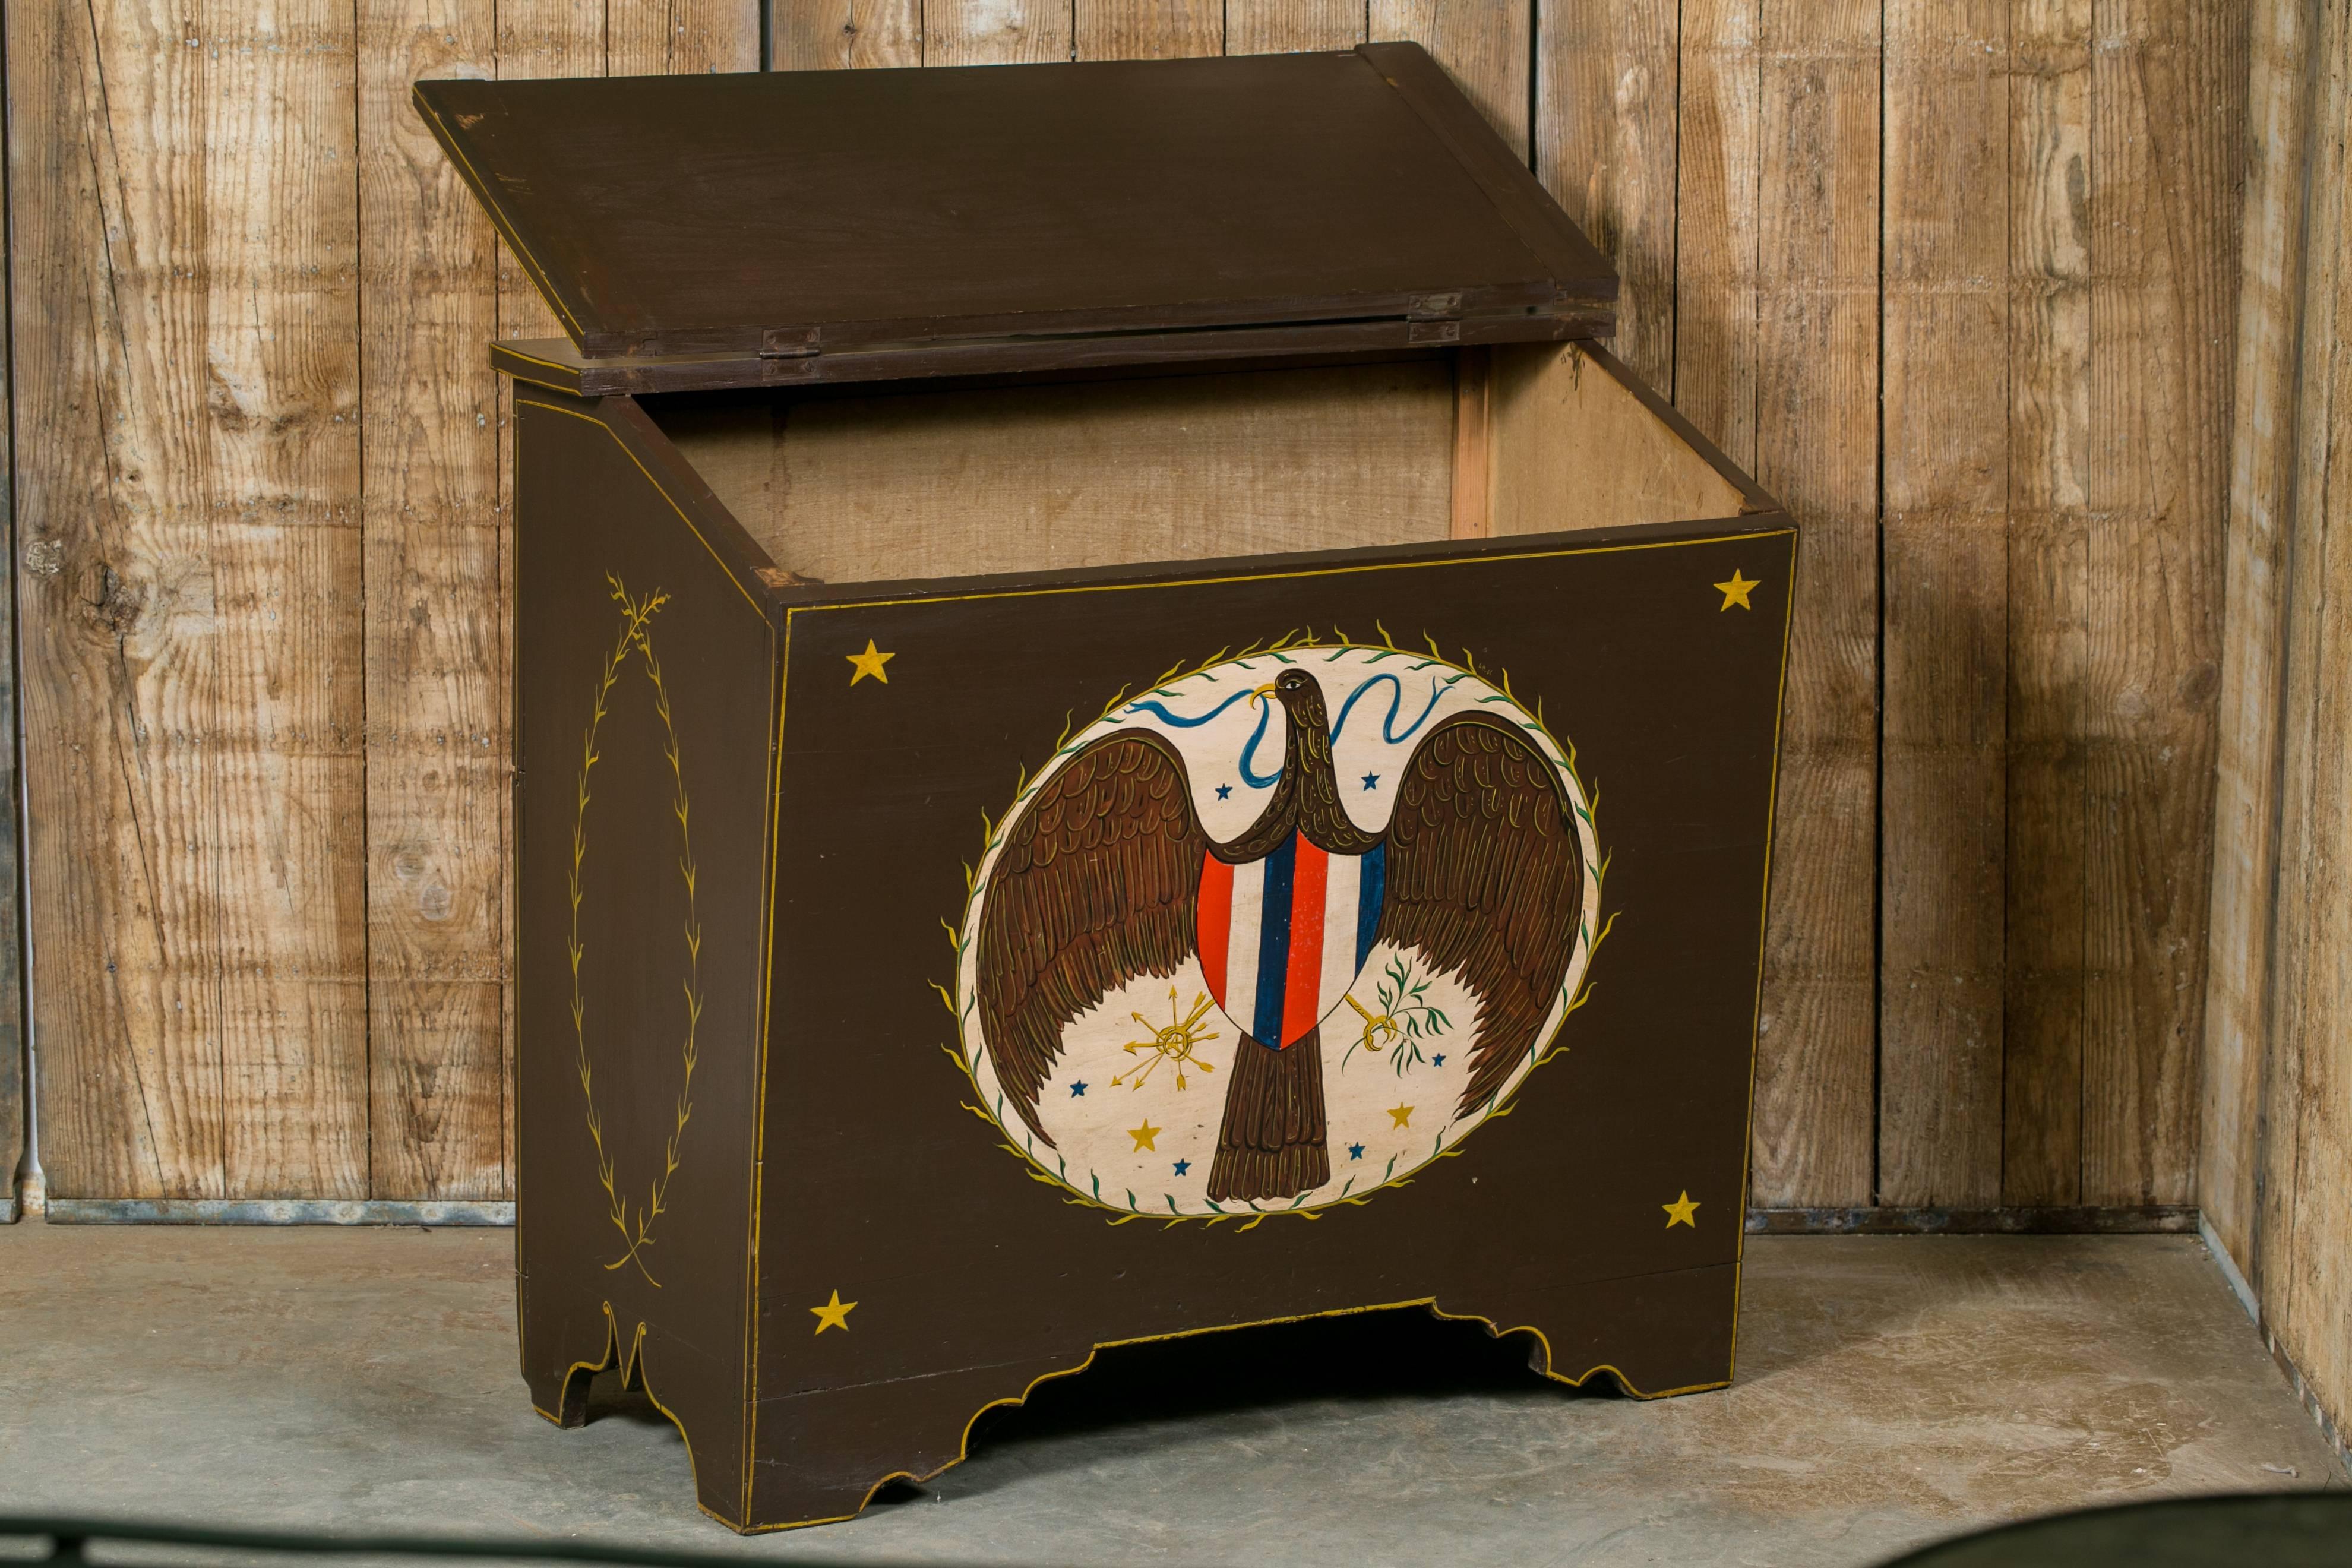 Antique Americana style North American blanket chest with hinged lid, circa 1900. Hand-painted with a stylized Federal Eagle on the front. One talon grasping arrows and the other an olive branch. Fruit motif on the top with two cornucopia. Painting